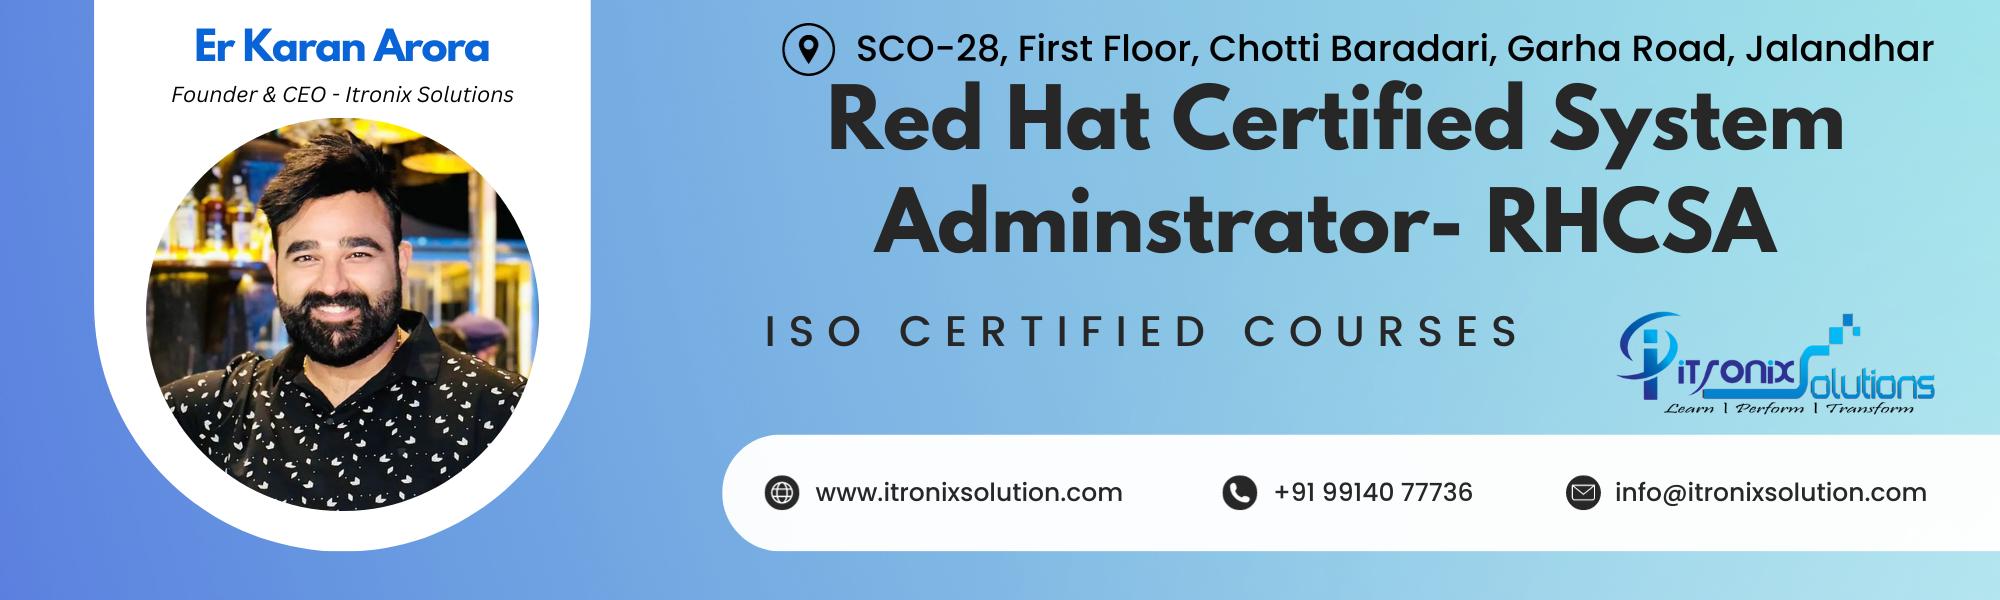 Best Red Hat Certified System Administrator Course Training in Jalandhar